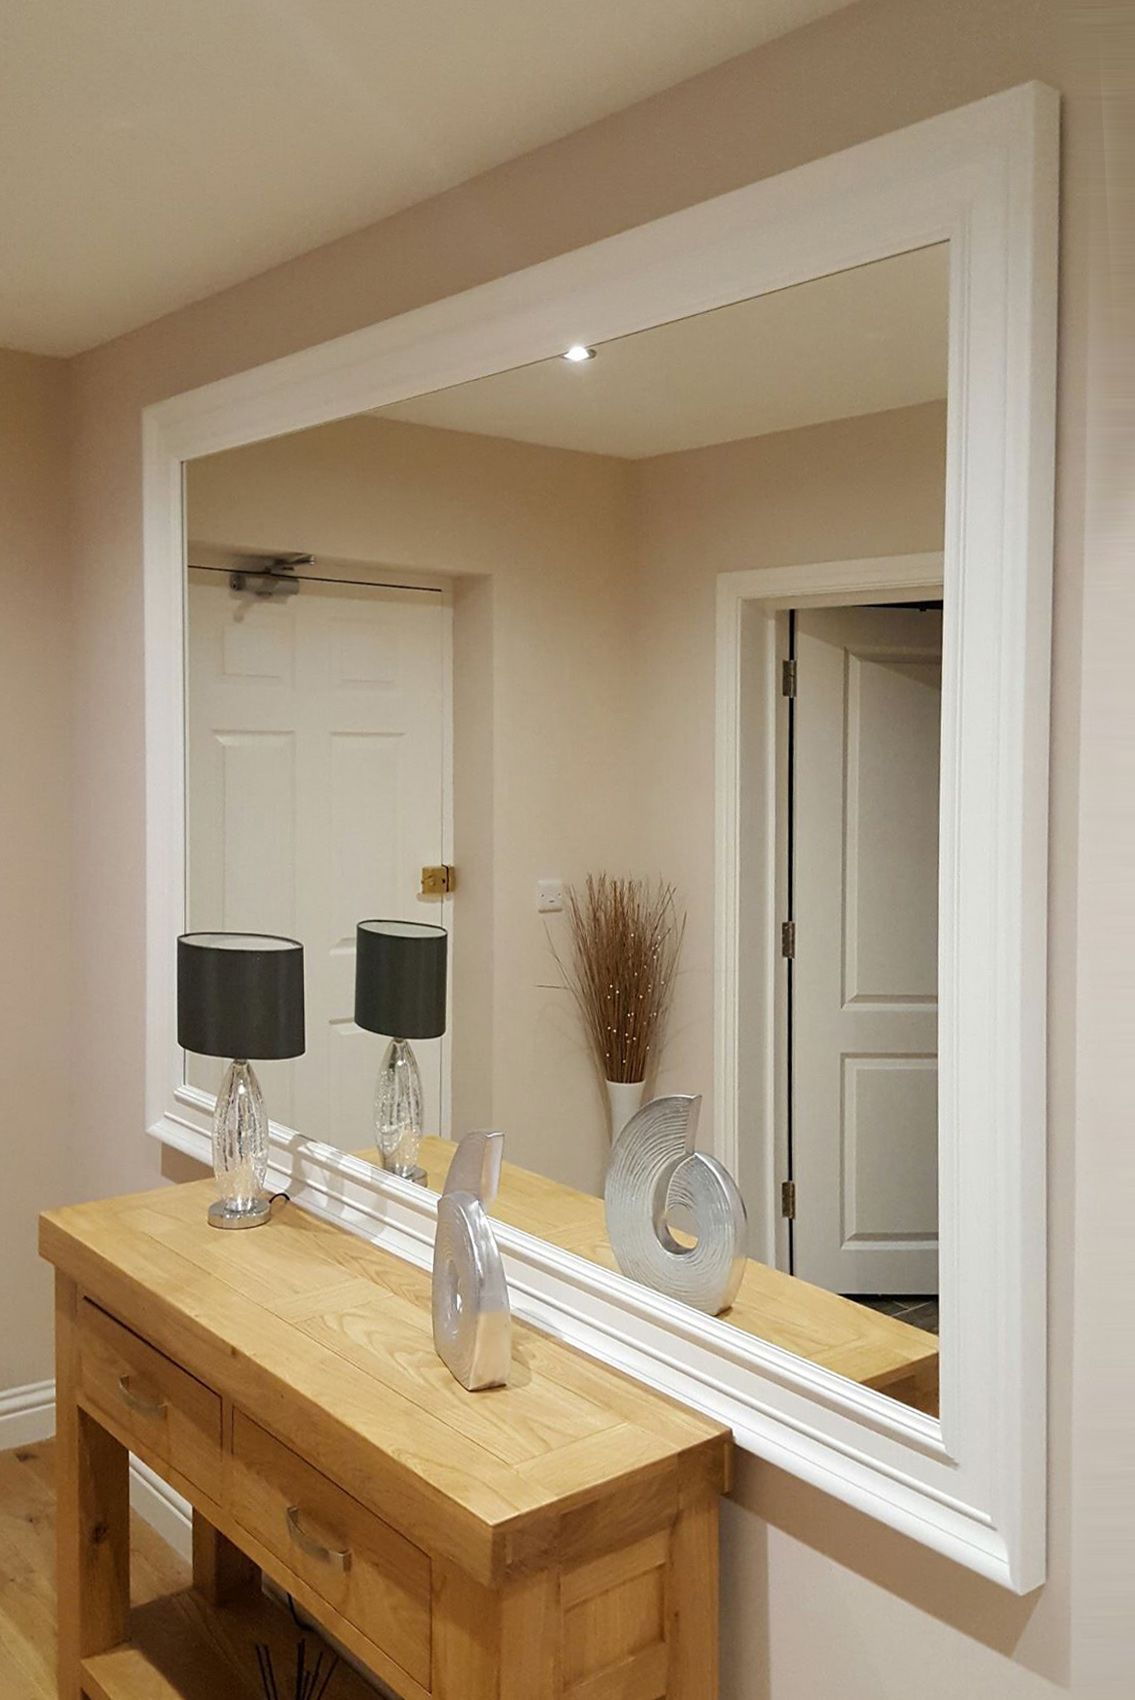 White Modern Big Leaner Wall Mirror, How Do You Dispose Of A Large Glass Mirror